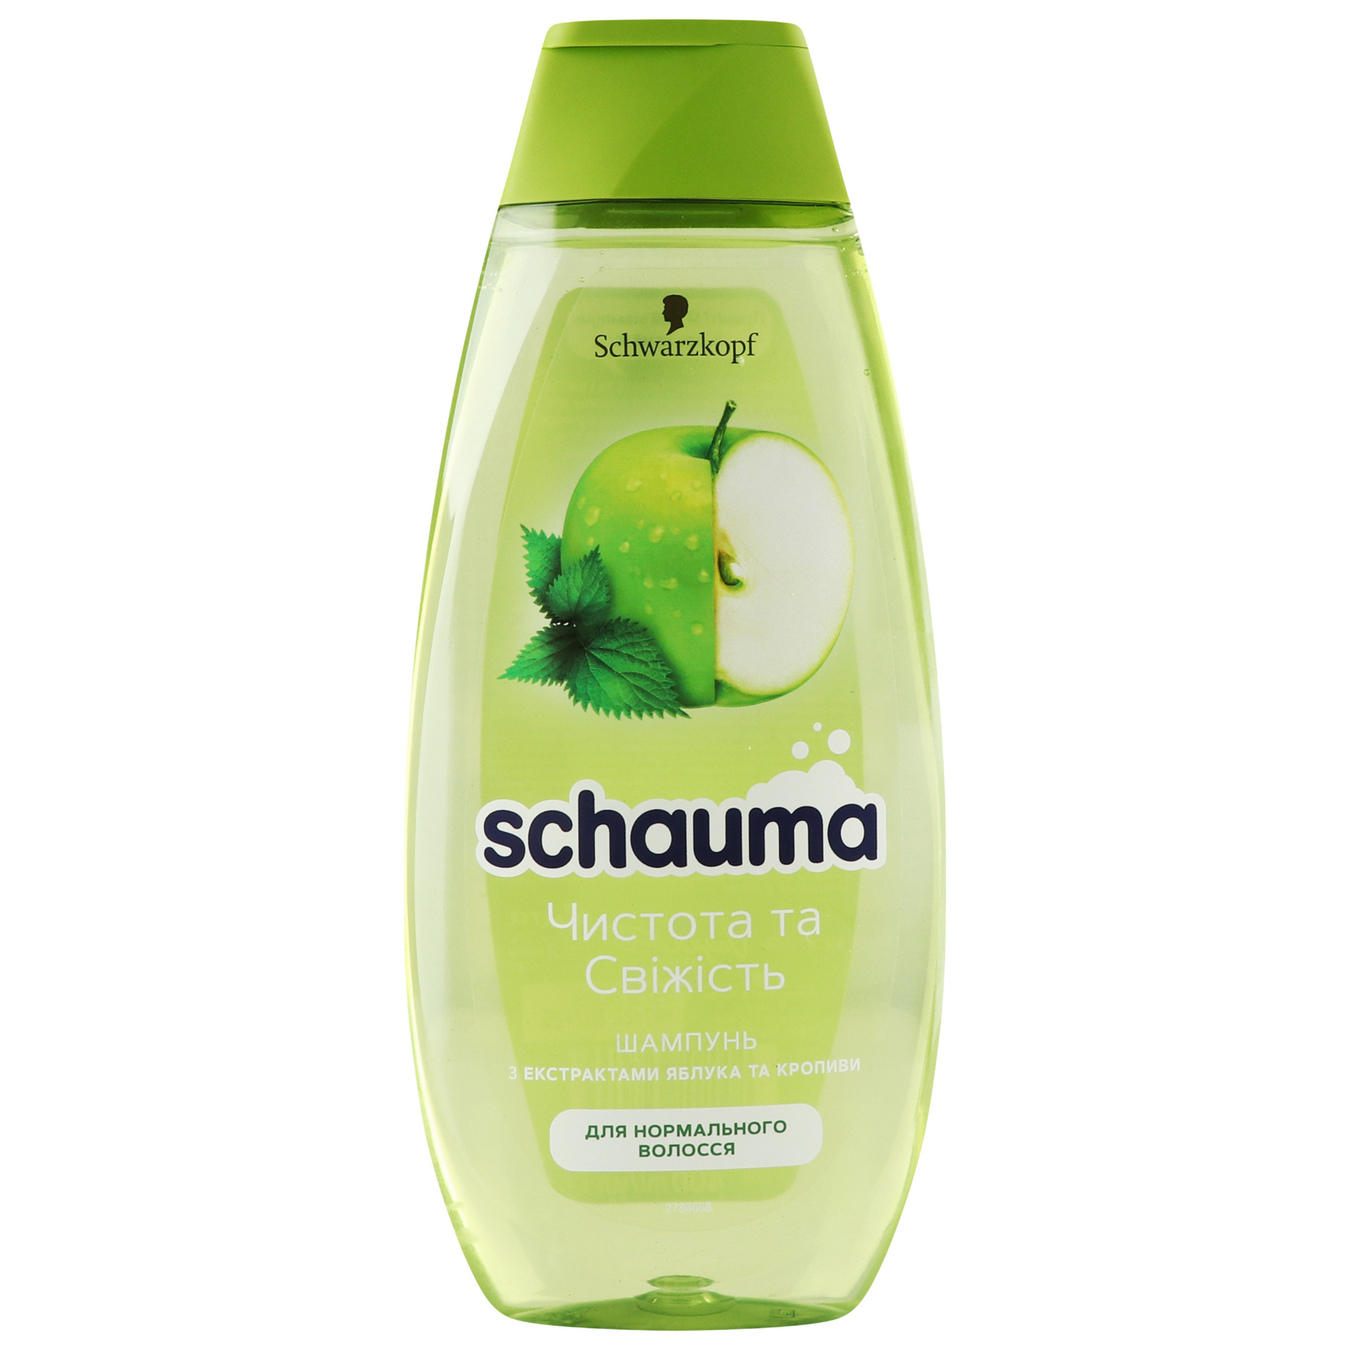 Shampoo Schauma Purity and Freshness with apple and nettle extract for normal hair 400ml